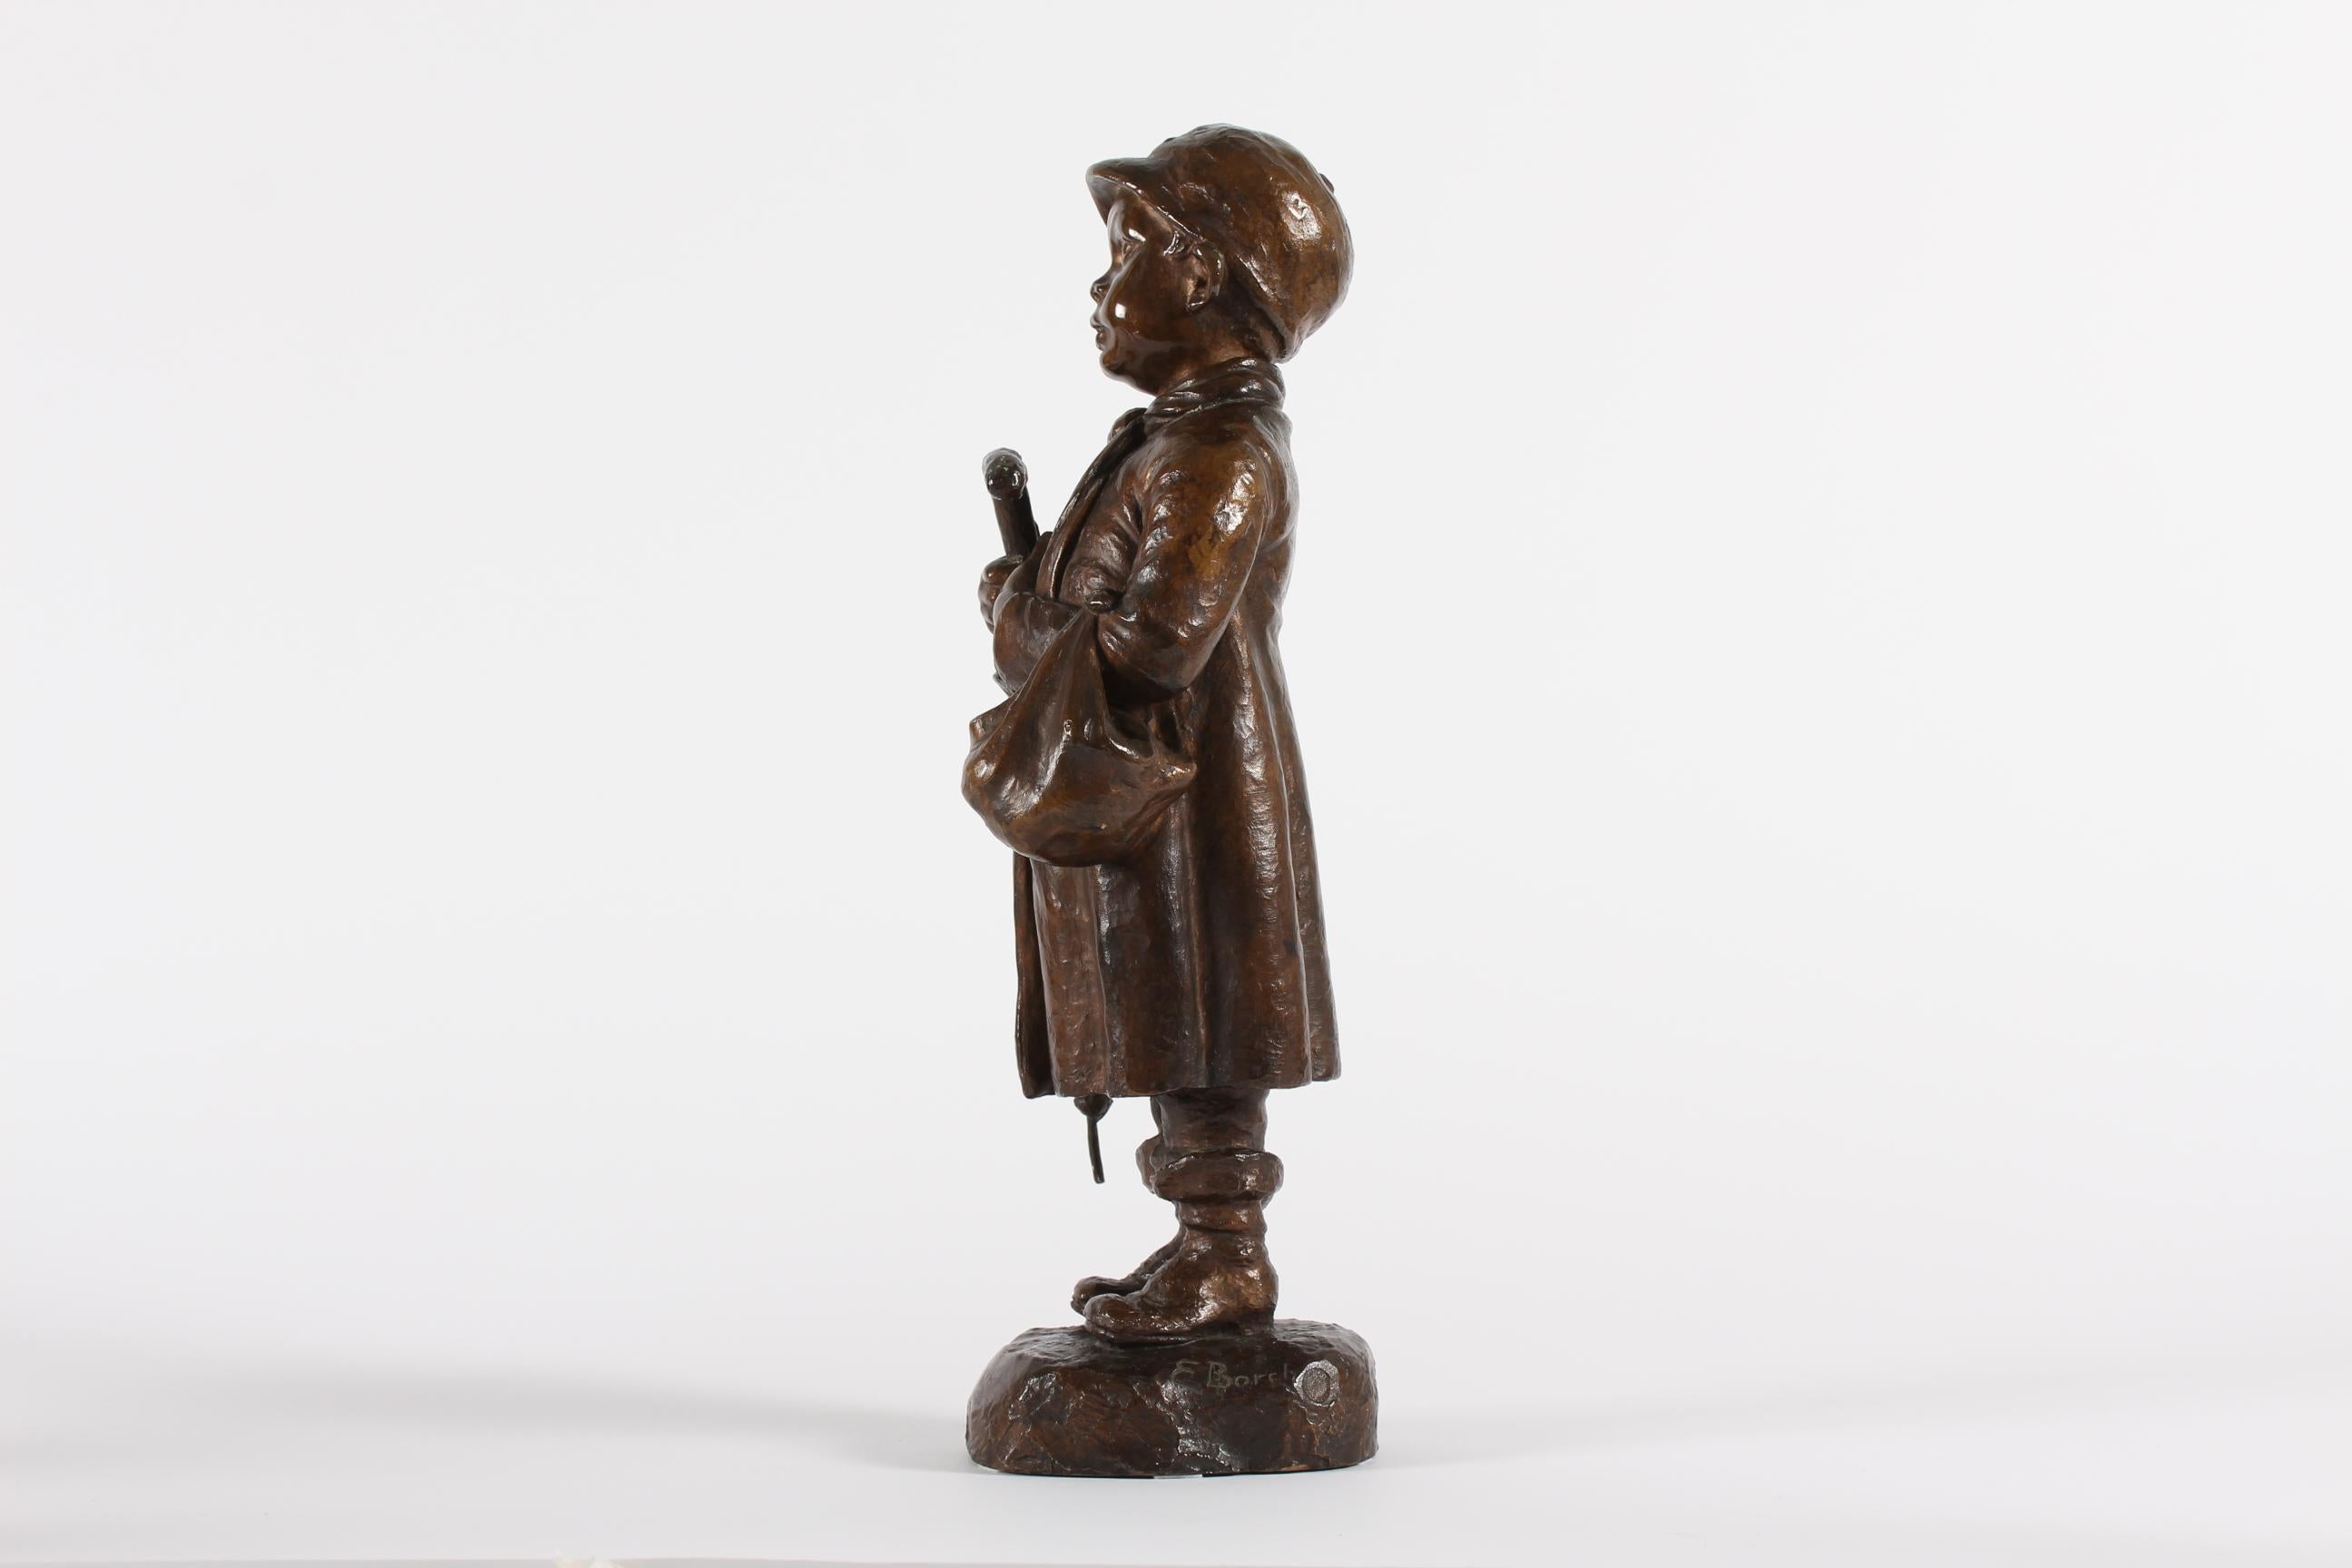 Danish Elna Borch Large Bronze Figurine of a Young Boy with Umbrella 1950s In Good Condition For Sale In Aarhus C, DK